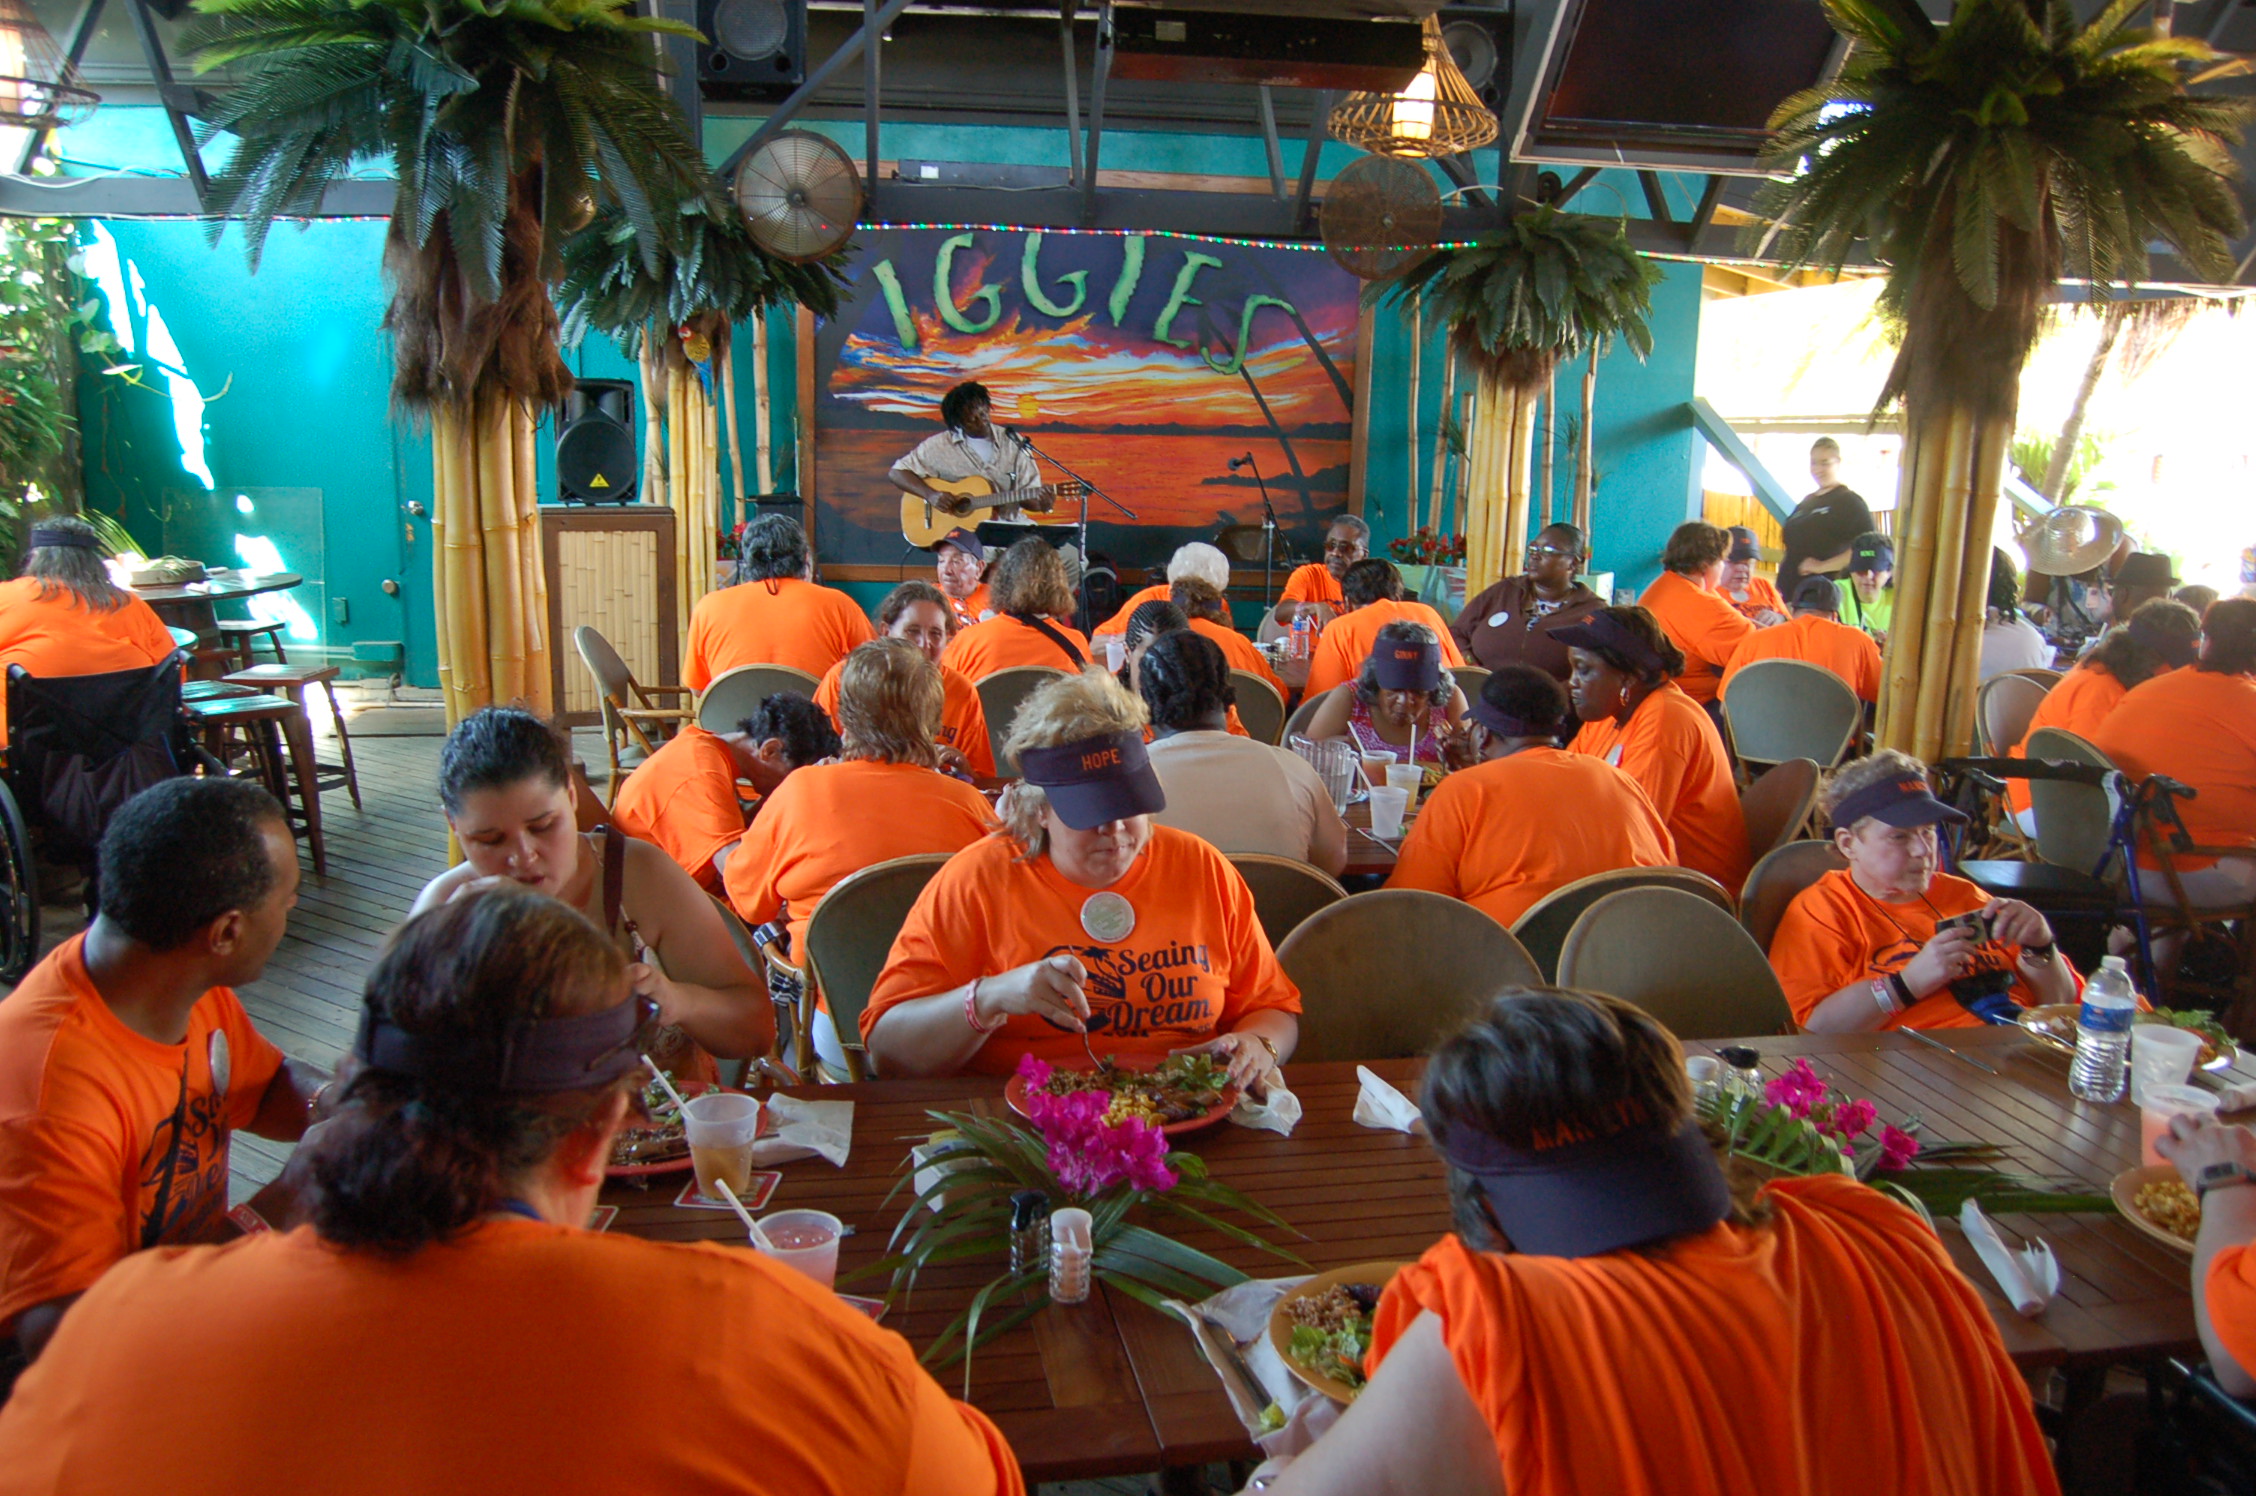 Lunch at Iggie's was provided courtesy of the Tourism Department. (Photo Karen Elowitt)